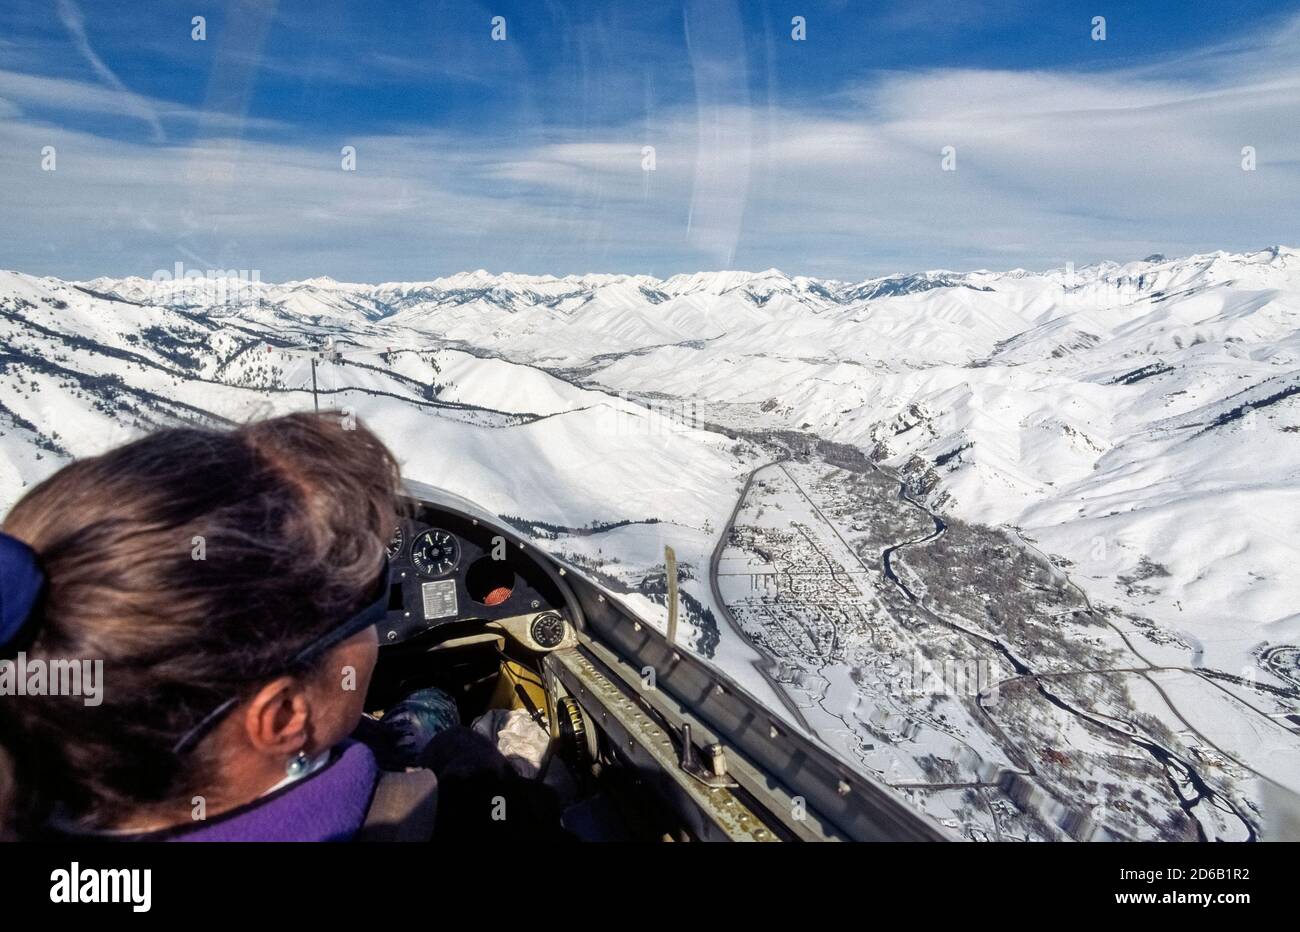 A female tourist on a winter sightseeing glider flight looks through the sailplane's clear canopy at snow-covered Smoky Mountains and the Wood River Valley that's home to adjacent resort towns, Ketchum and Sun Valley, two popular vacation destinations in Idaho, USA. The scenic area boasts numerous beginner-to-expert ski trails that attract skiers and snowboarders throughout the winter season.. Stock Photo